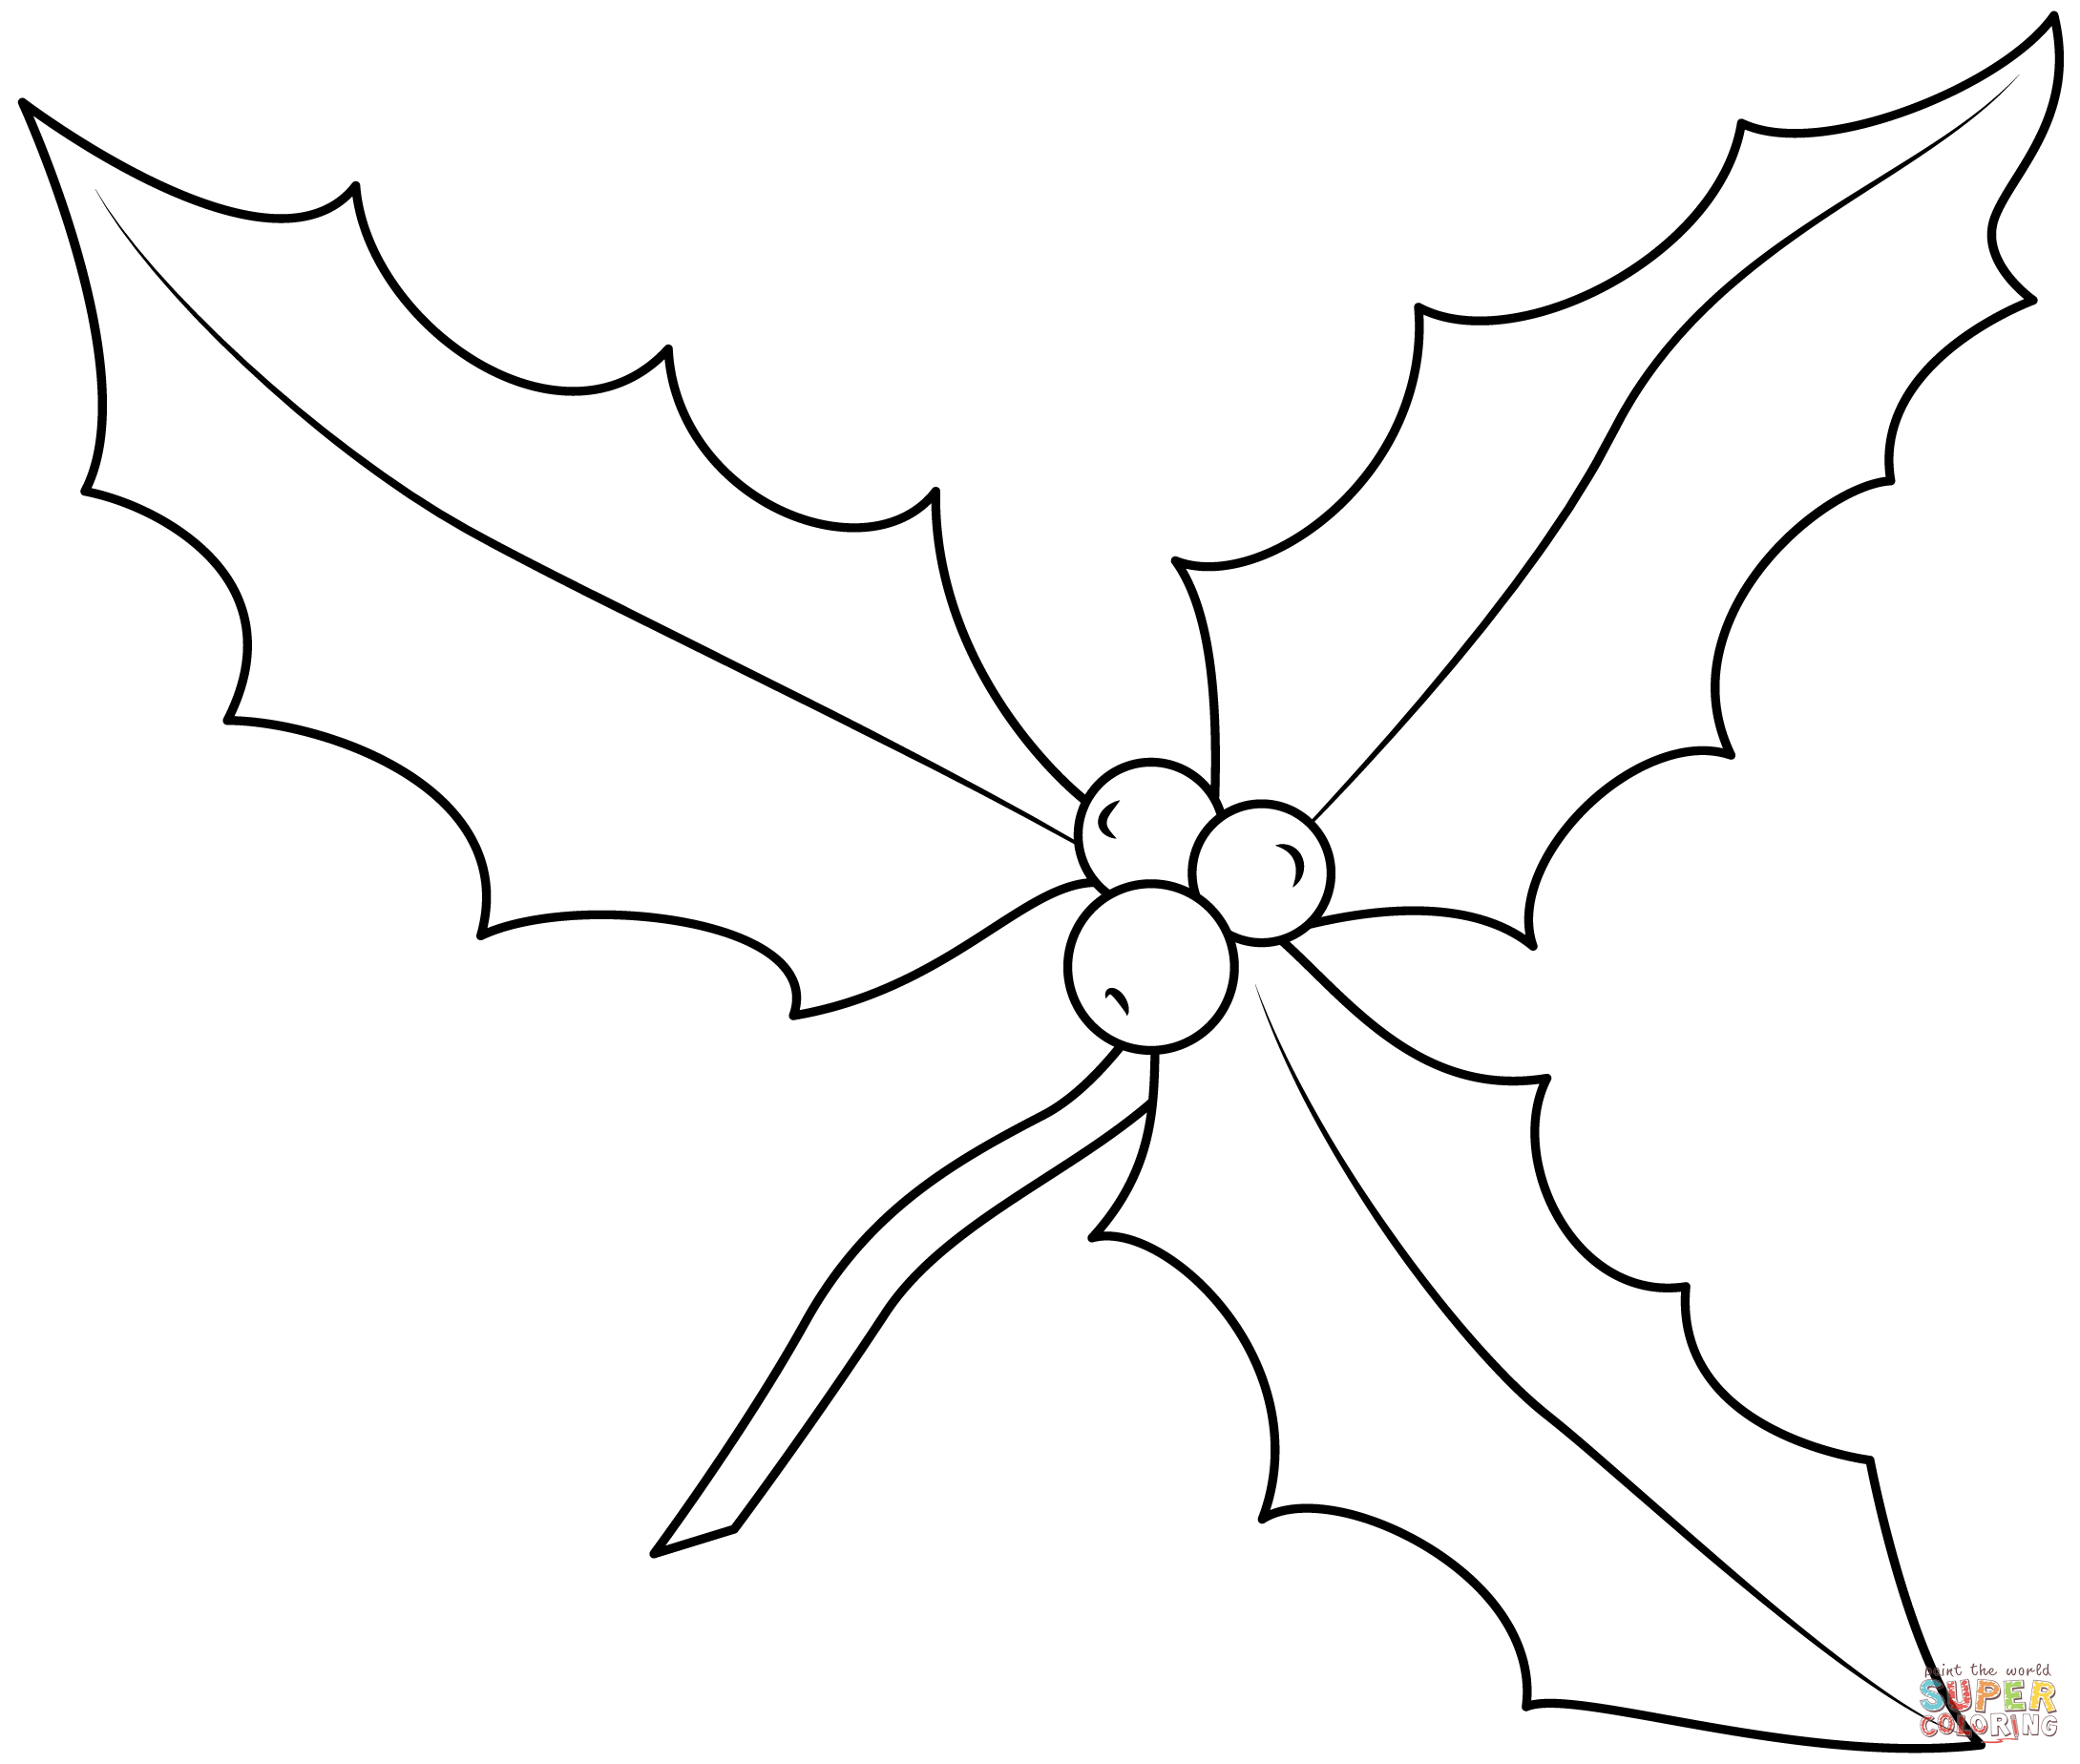 Holly leaf coloring page free printable coloring pages